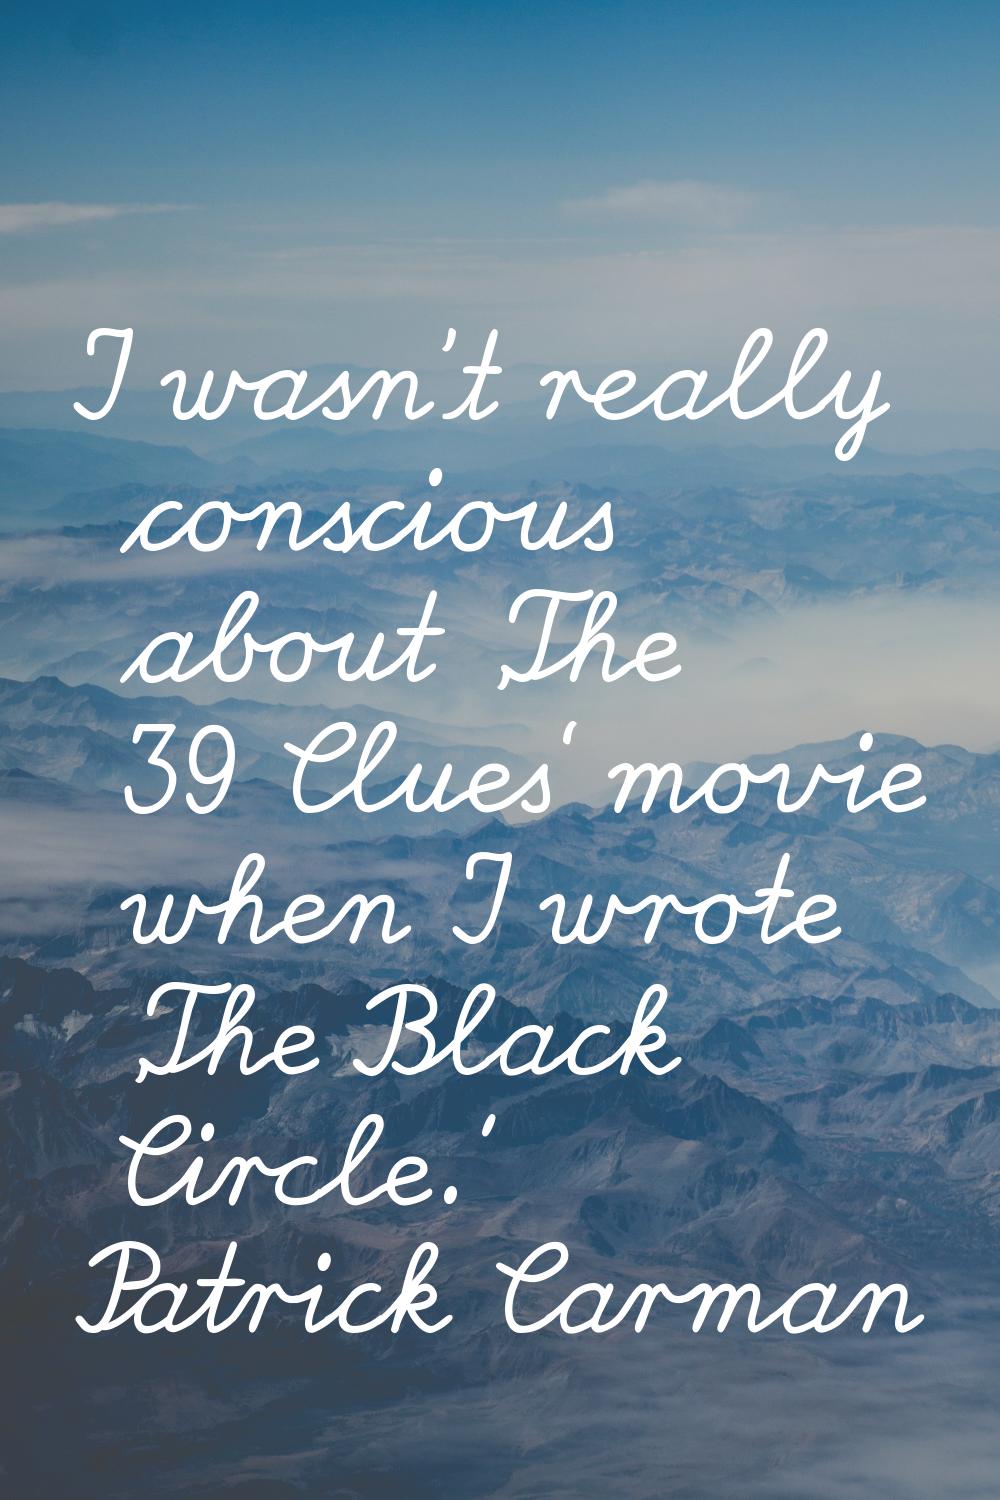 I wasn't really conscious about 'The 39 Clues' movie when I wrote 'The Black Circle.'